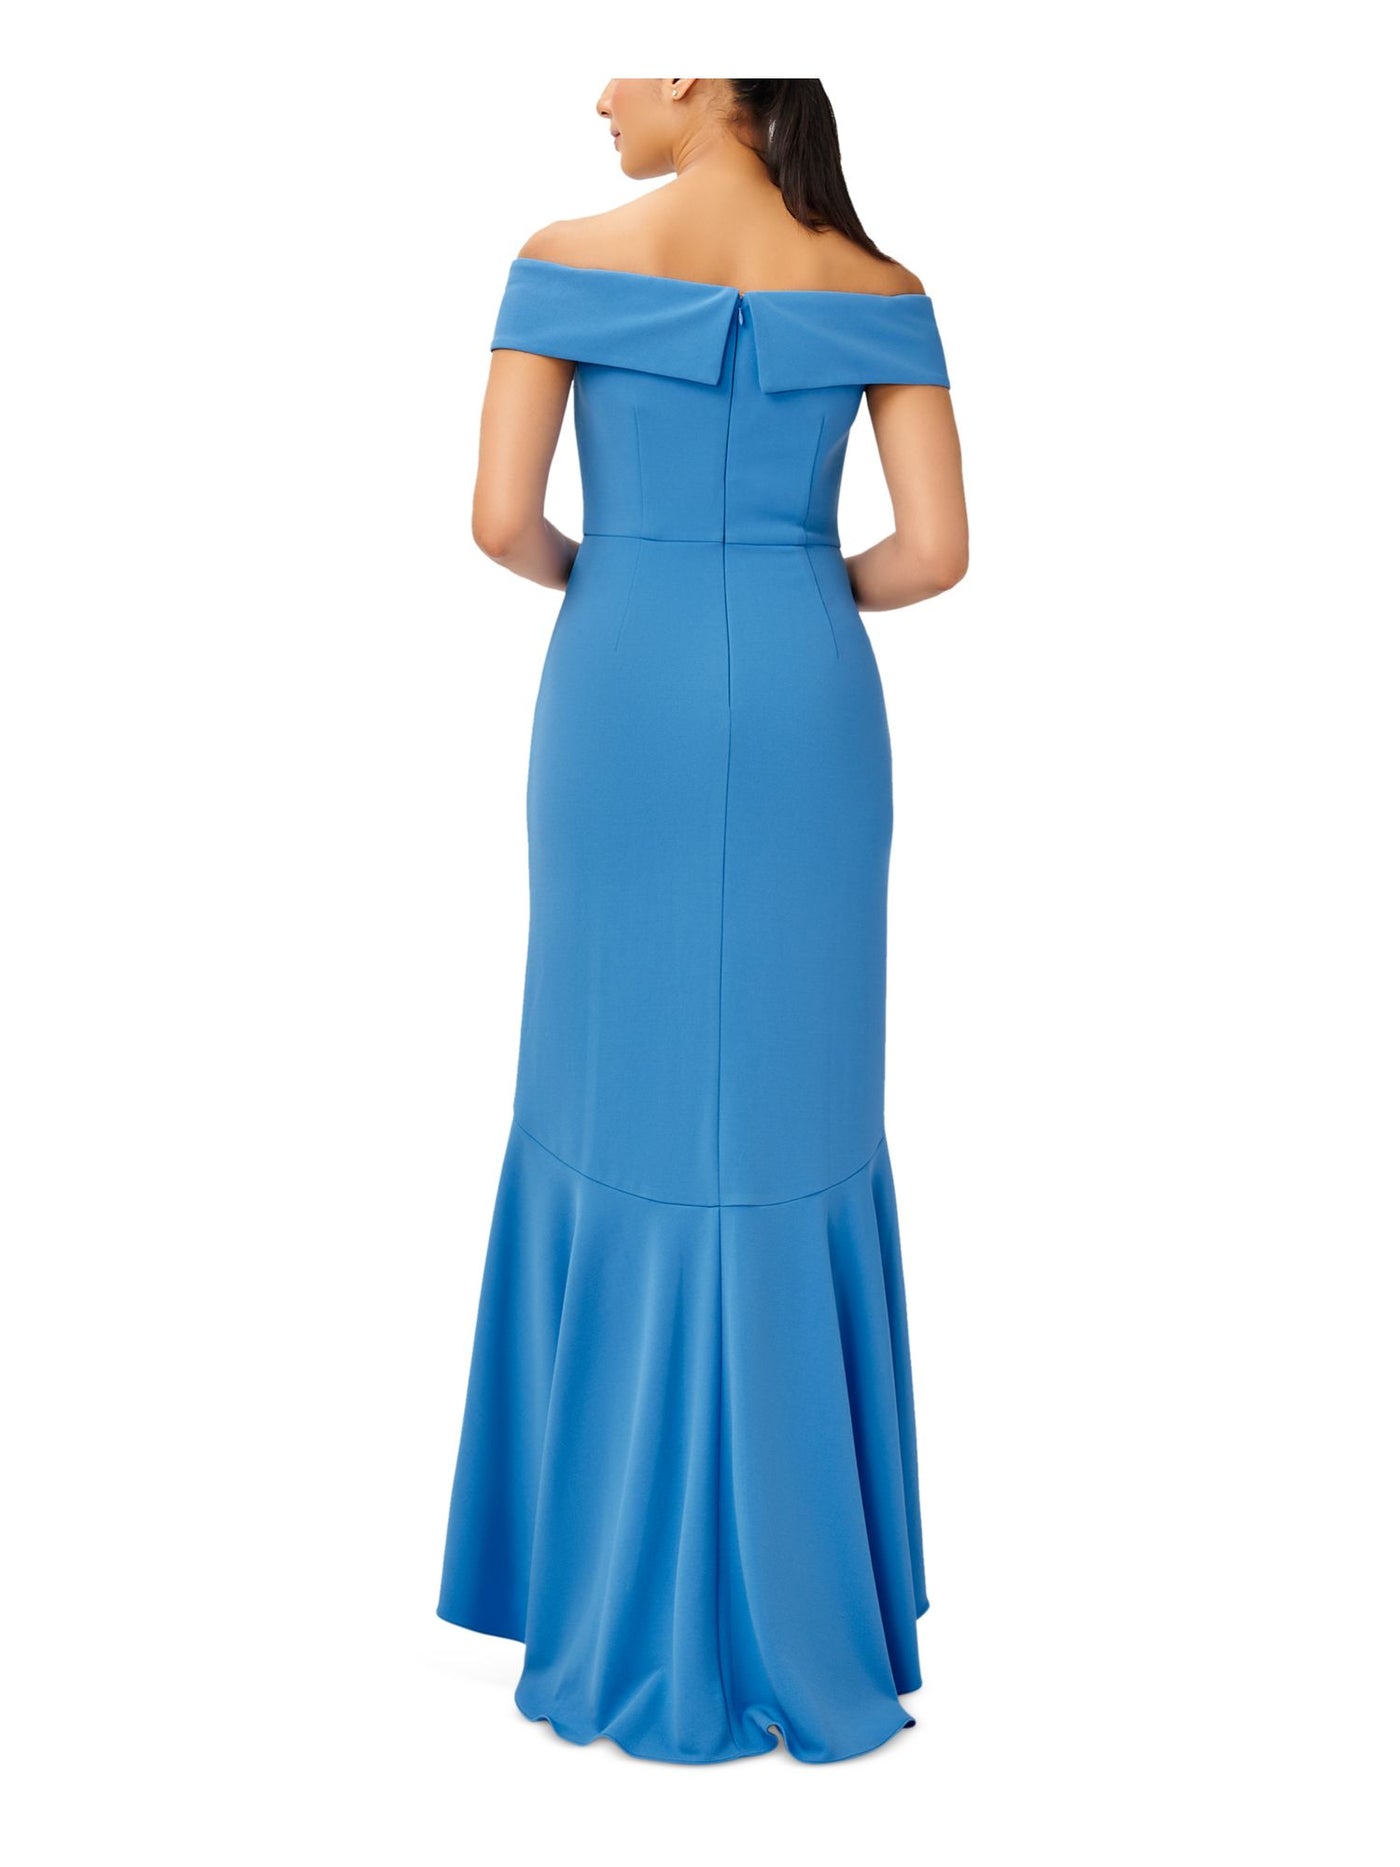 ADRIANNA PAPELL Womens Blue Zippered Ruffled Pleated Lined Hi-lo Hem Short Sleeve Off Shoulder Full-Length Formal Gown Dress 4